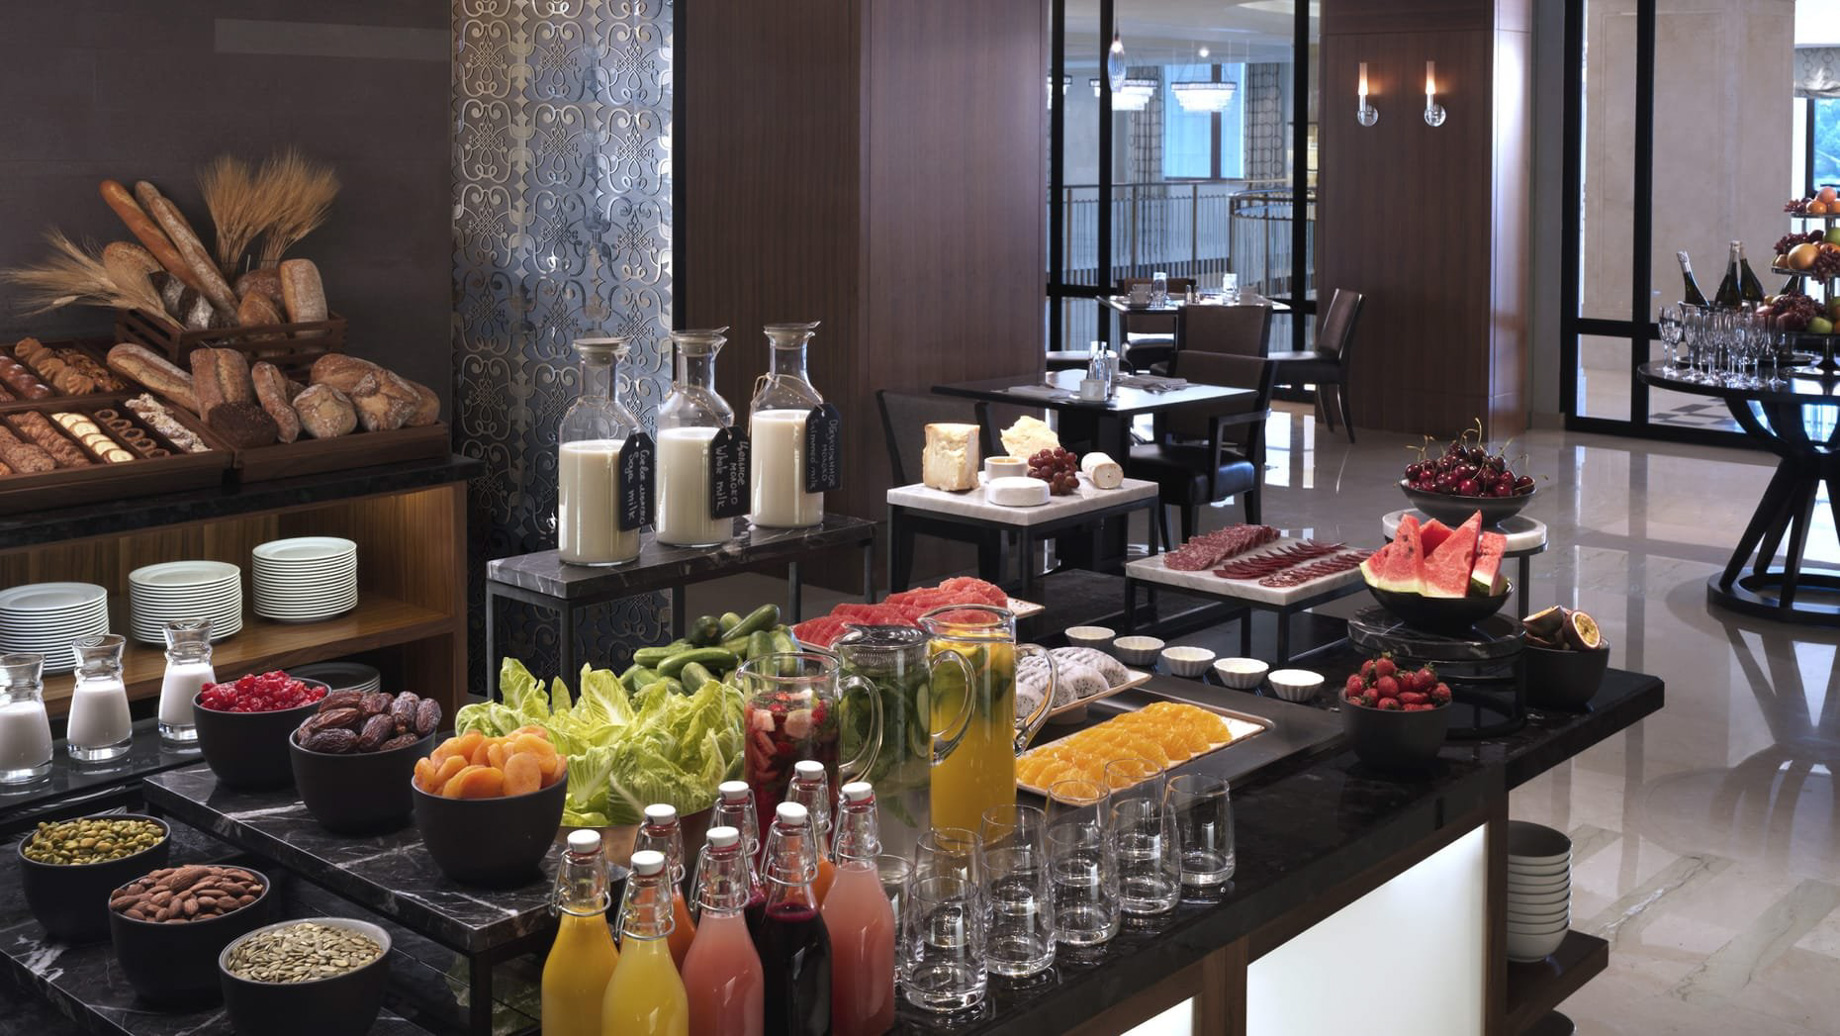 Four Seasons Hotel Moscow – Moscow, Russia – Bystro Restaurant Breakfast Buffet